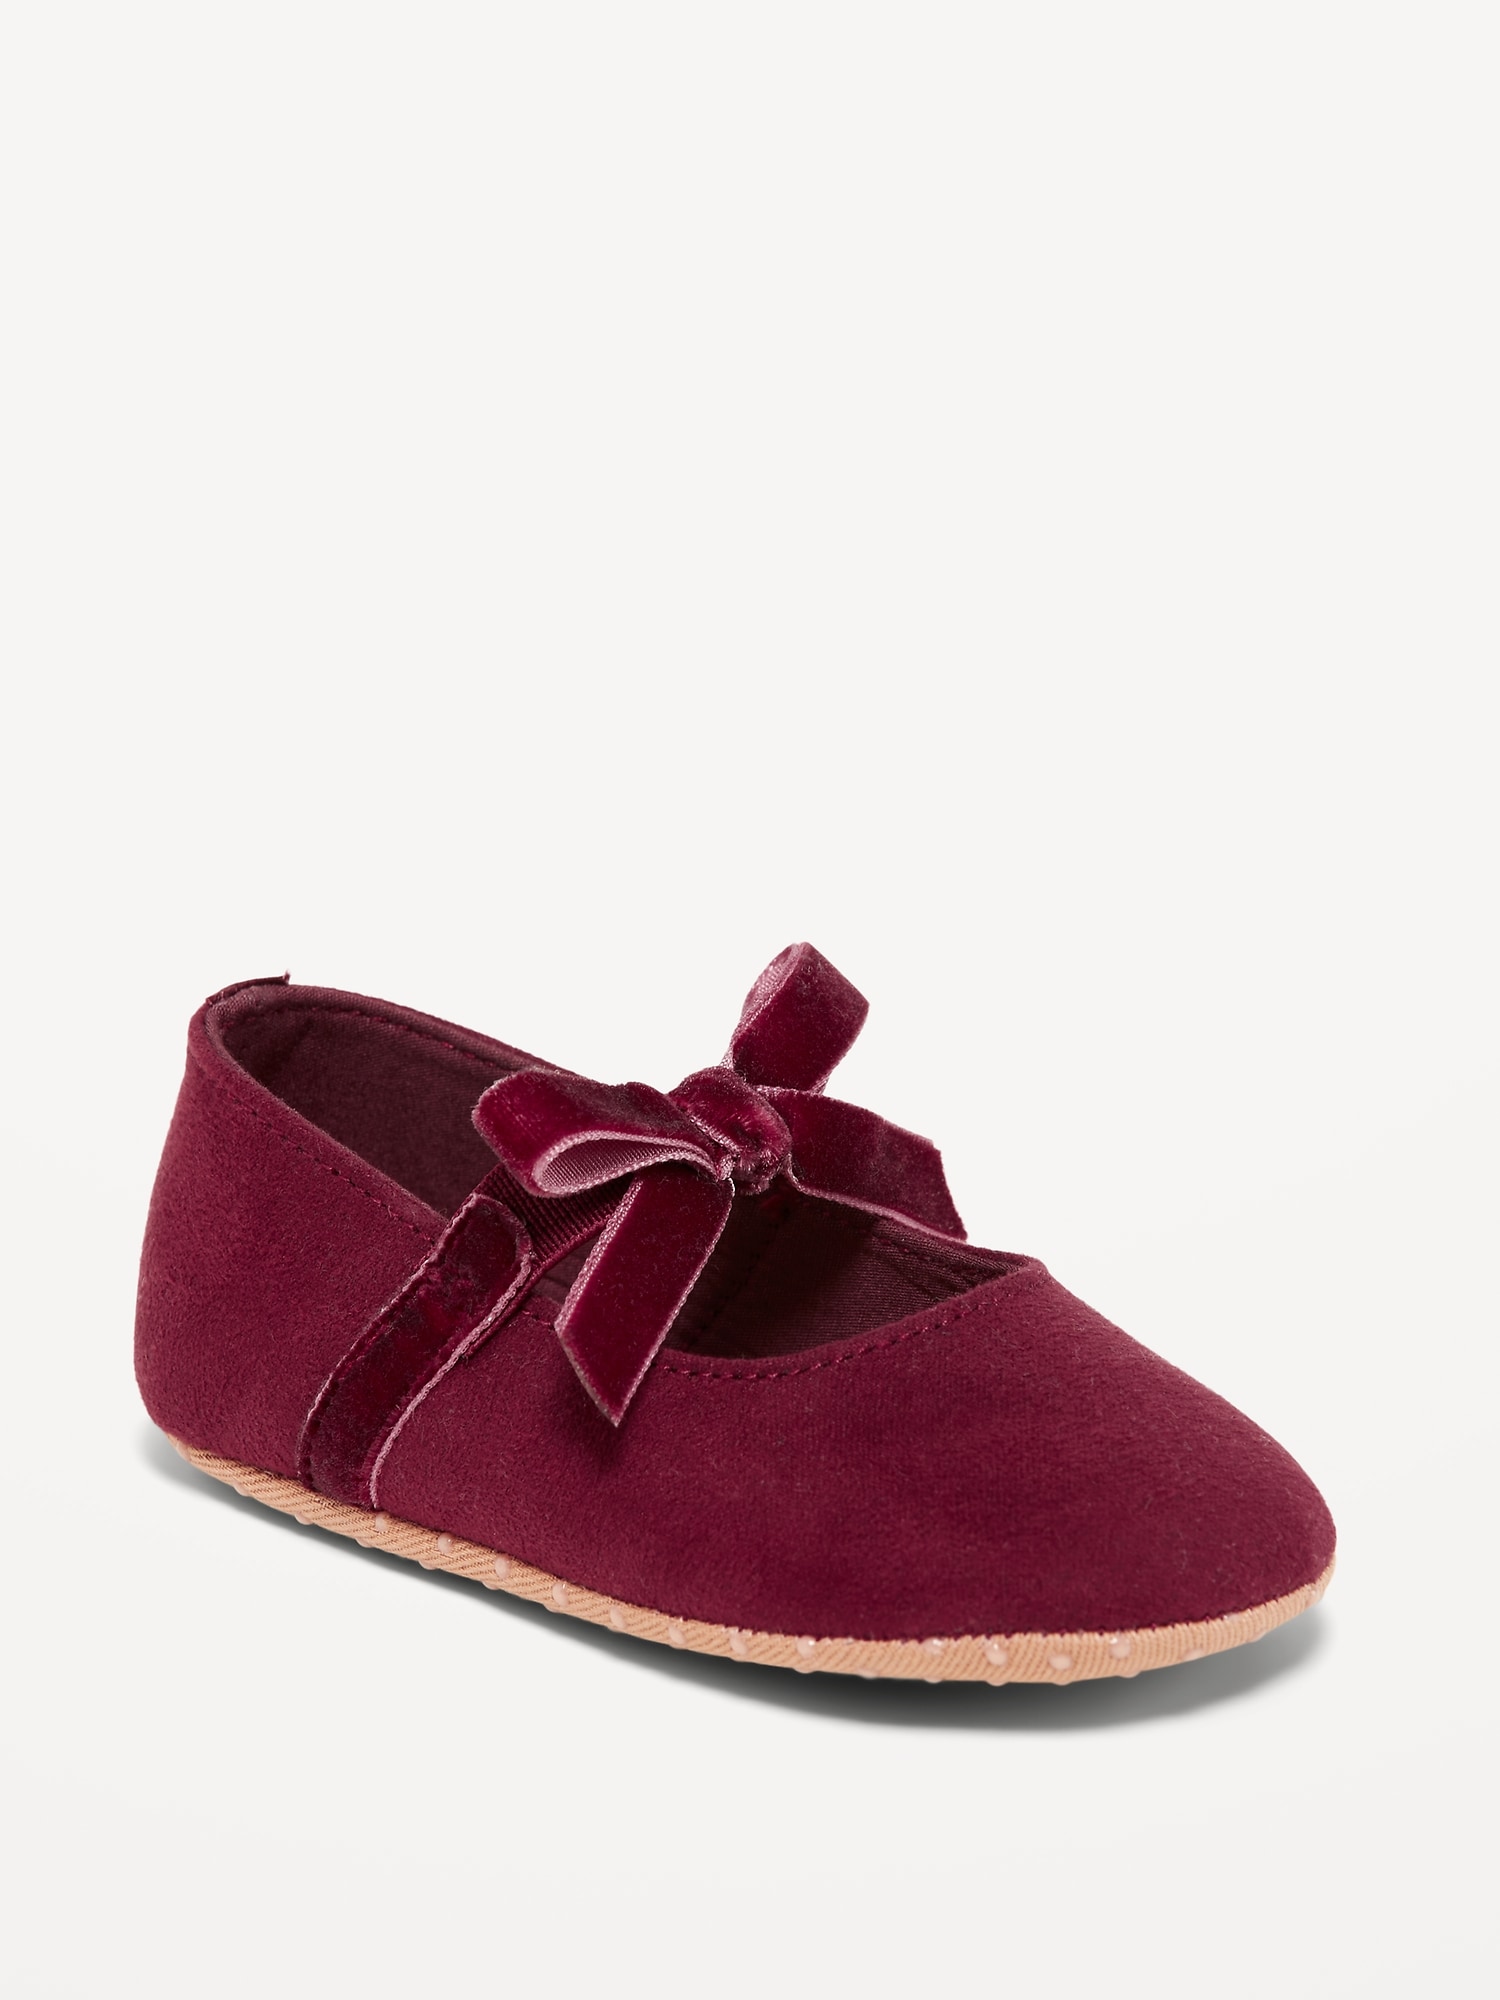 Oldnavy Faux-Suede Bow-Tie Ballet Flats for Baby